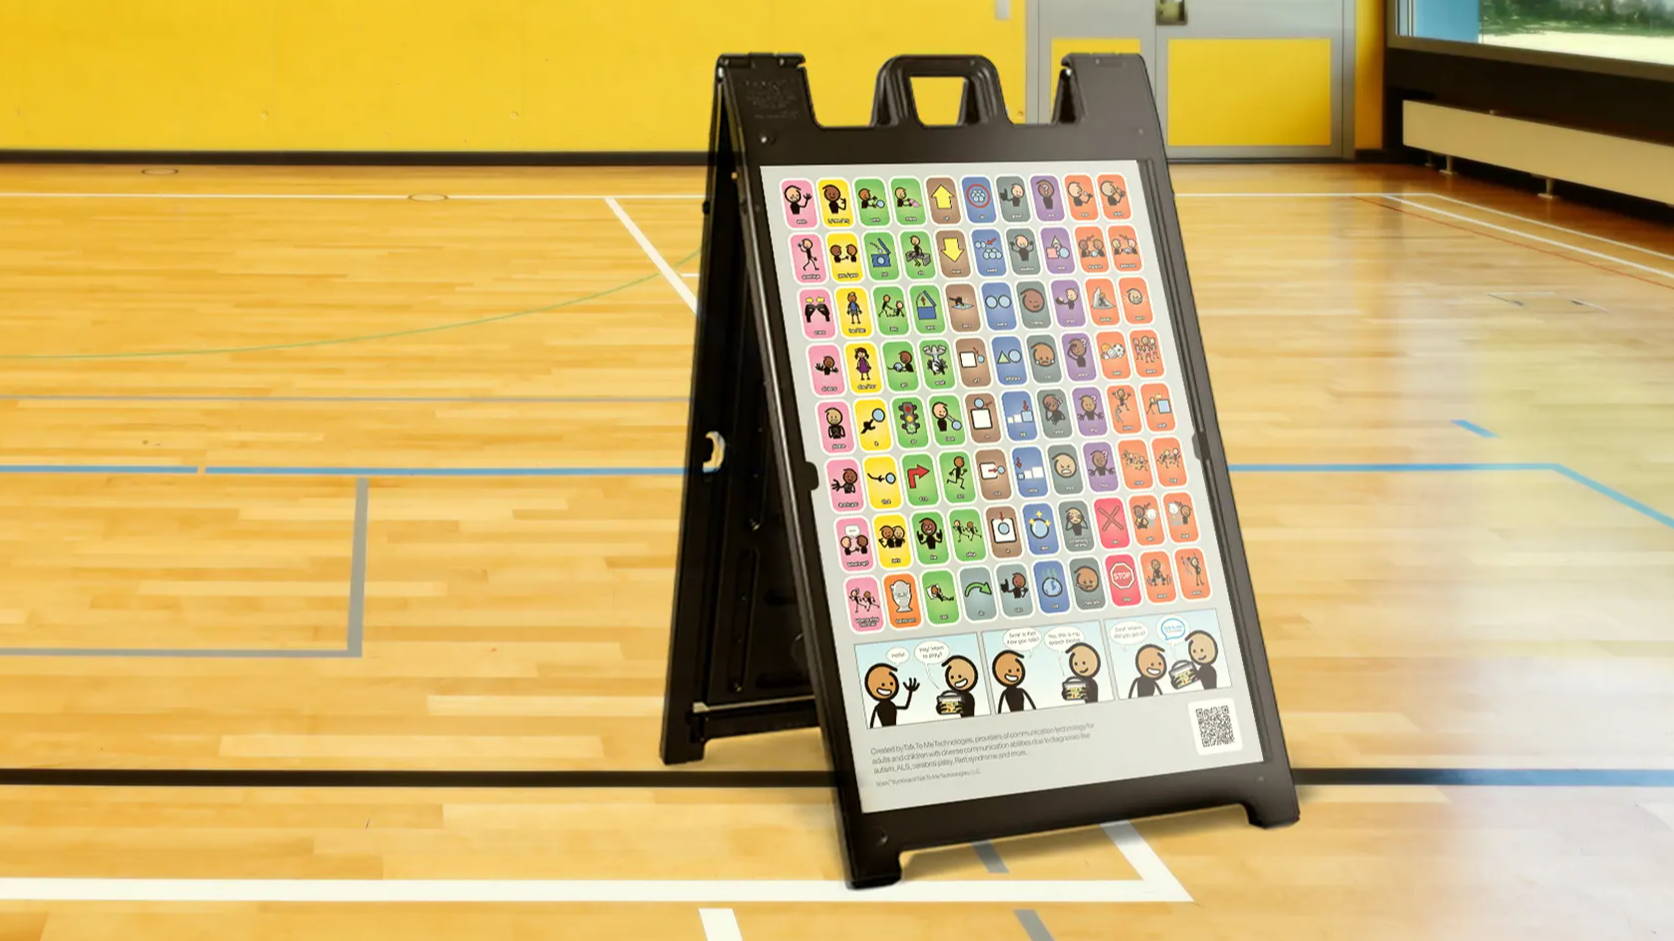 a-frame communication board in a gym